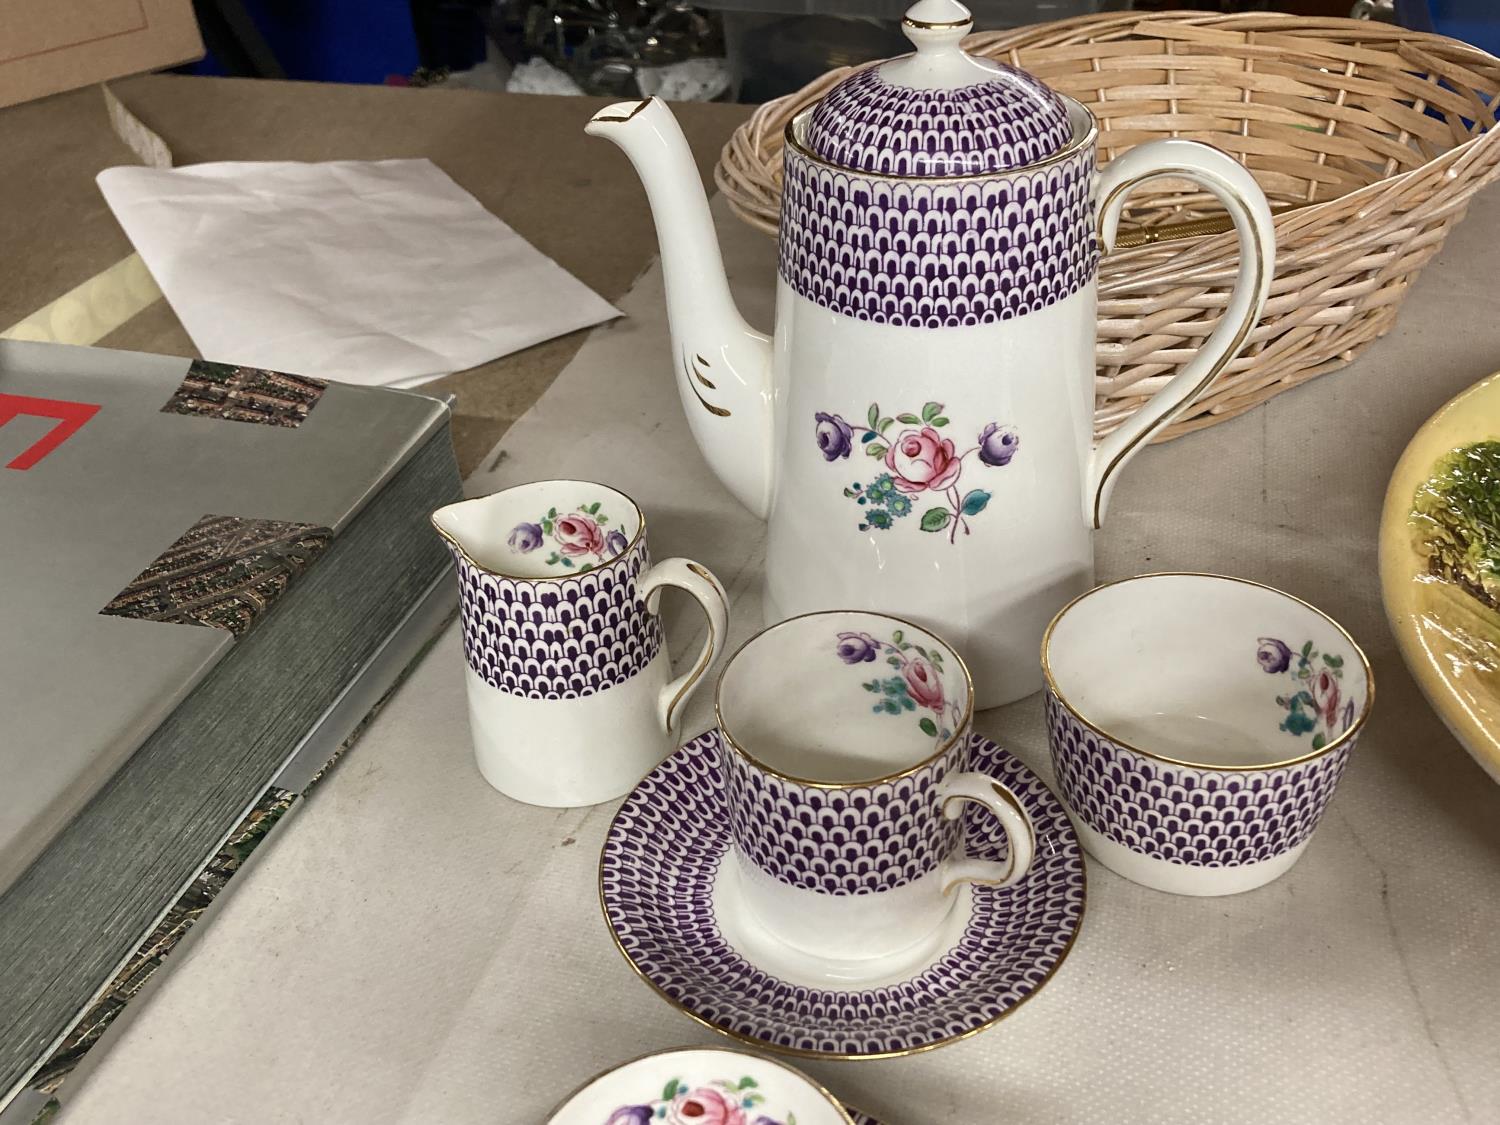 A NELSON CHINA PURPLE AND FLORAL COFFEE SET TO INCLUDE A COFFEE POT, CREAM JUG, SUGAR BOWL AND - Image 3 of 5